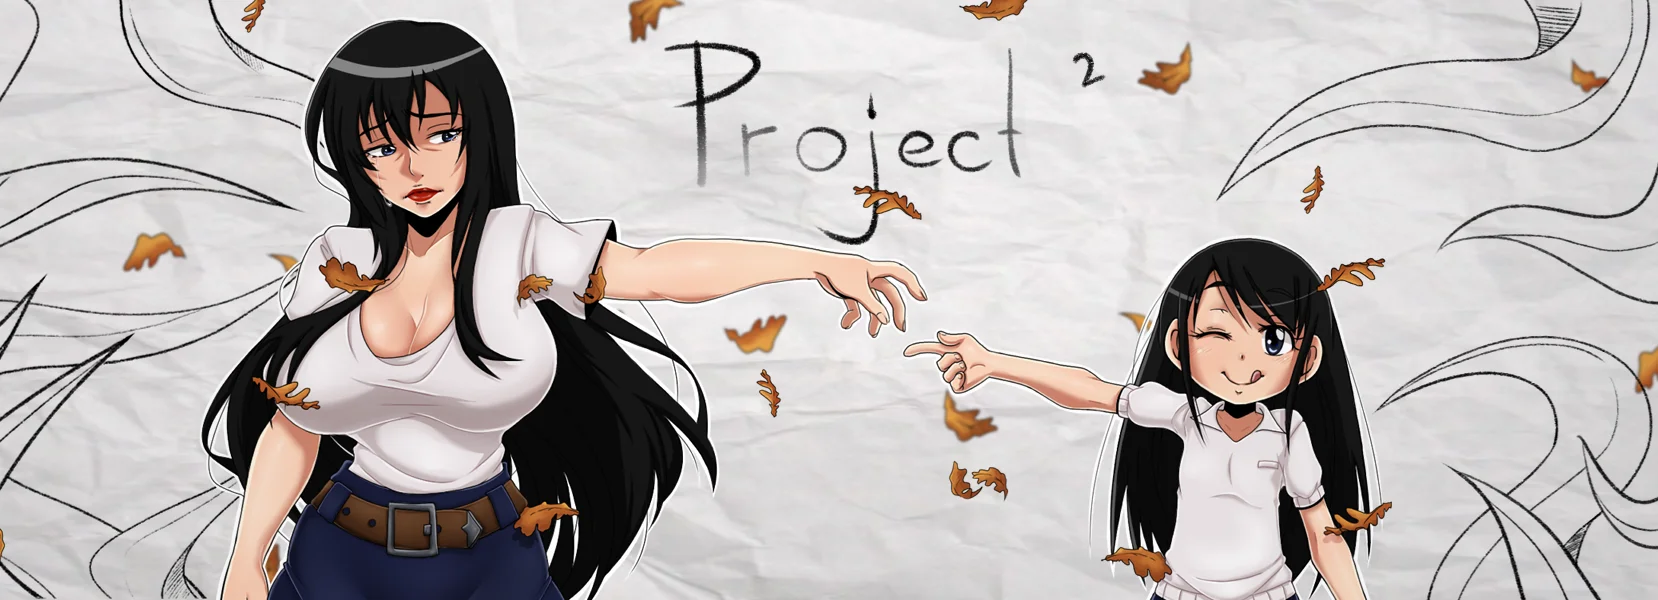 Project2